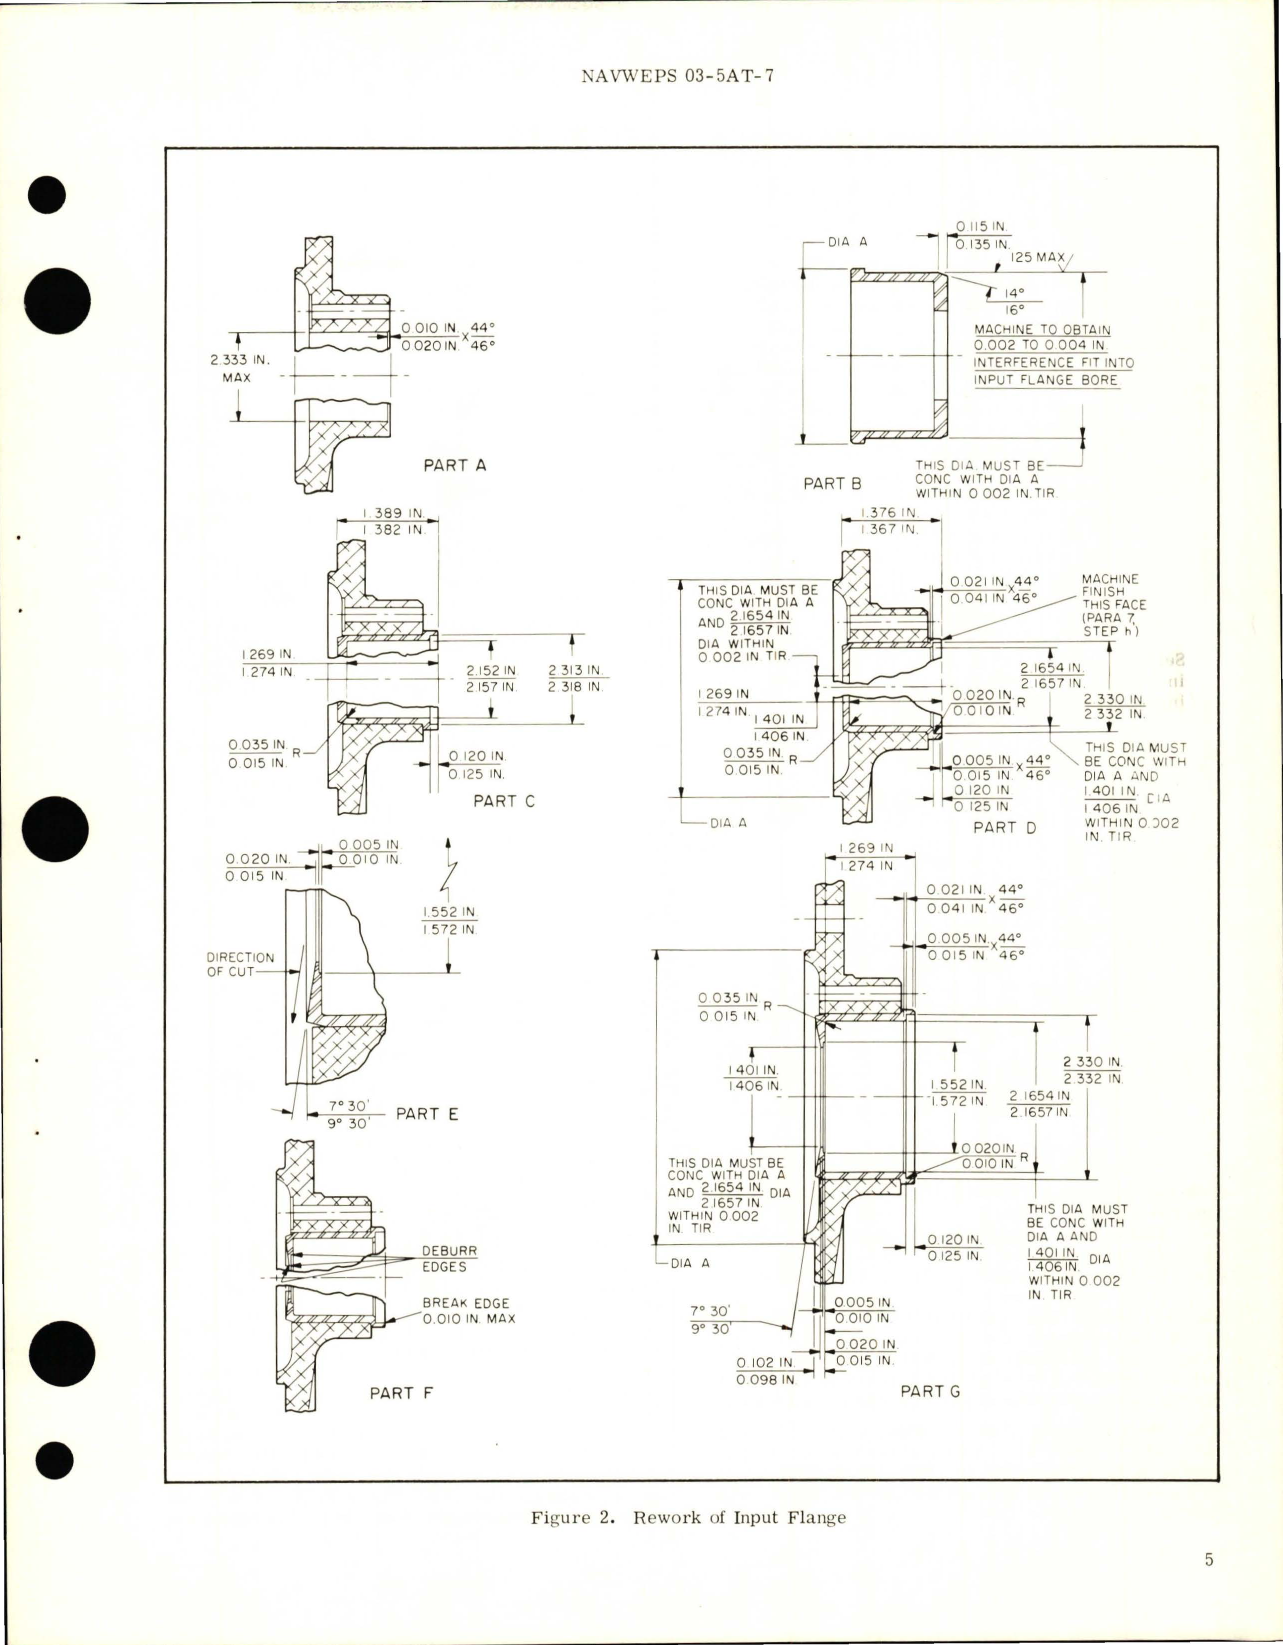 Sample page 7 from AirCorps Library document: Overhaul Instructions with Parts Breakdown for Constant Ratio Power Transmission Shaft - Part 19E29-3-C, -D, -E, -F, -G 